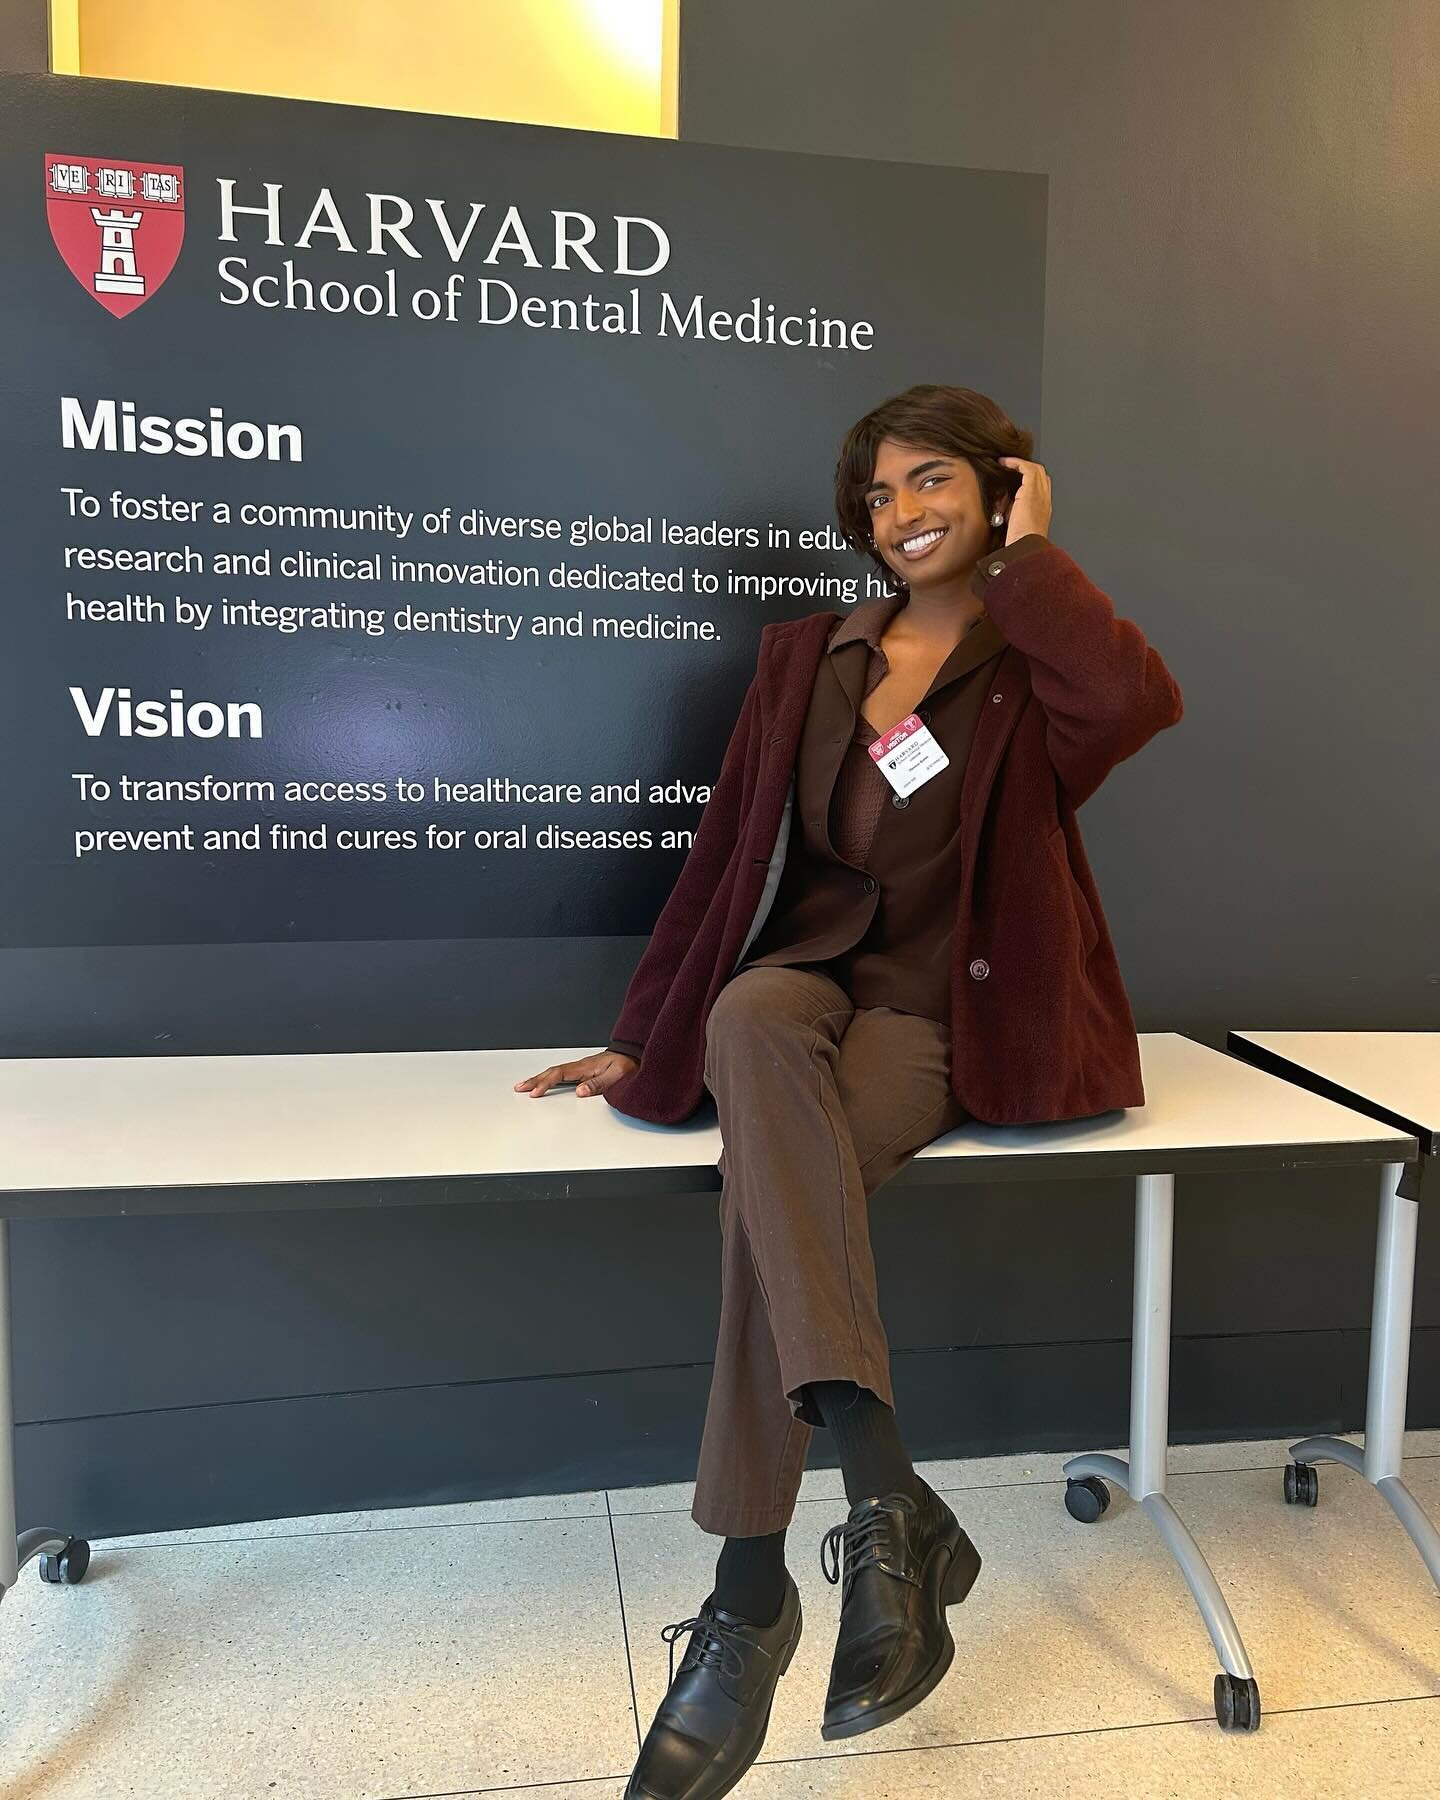 &ldquo;looking within, onward, and upward!&rdquo; &hearts;️

Thank you for the invite @harvarddentalmed @harvardmed 🫂

During these events, I had the opportunity to gain valuable insights into providing individualized care for special needs patients